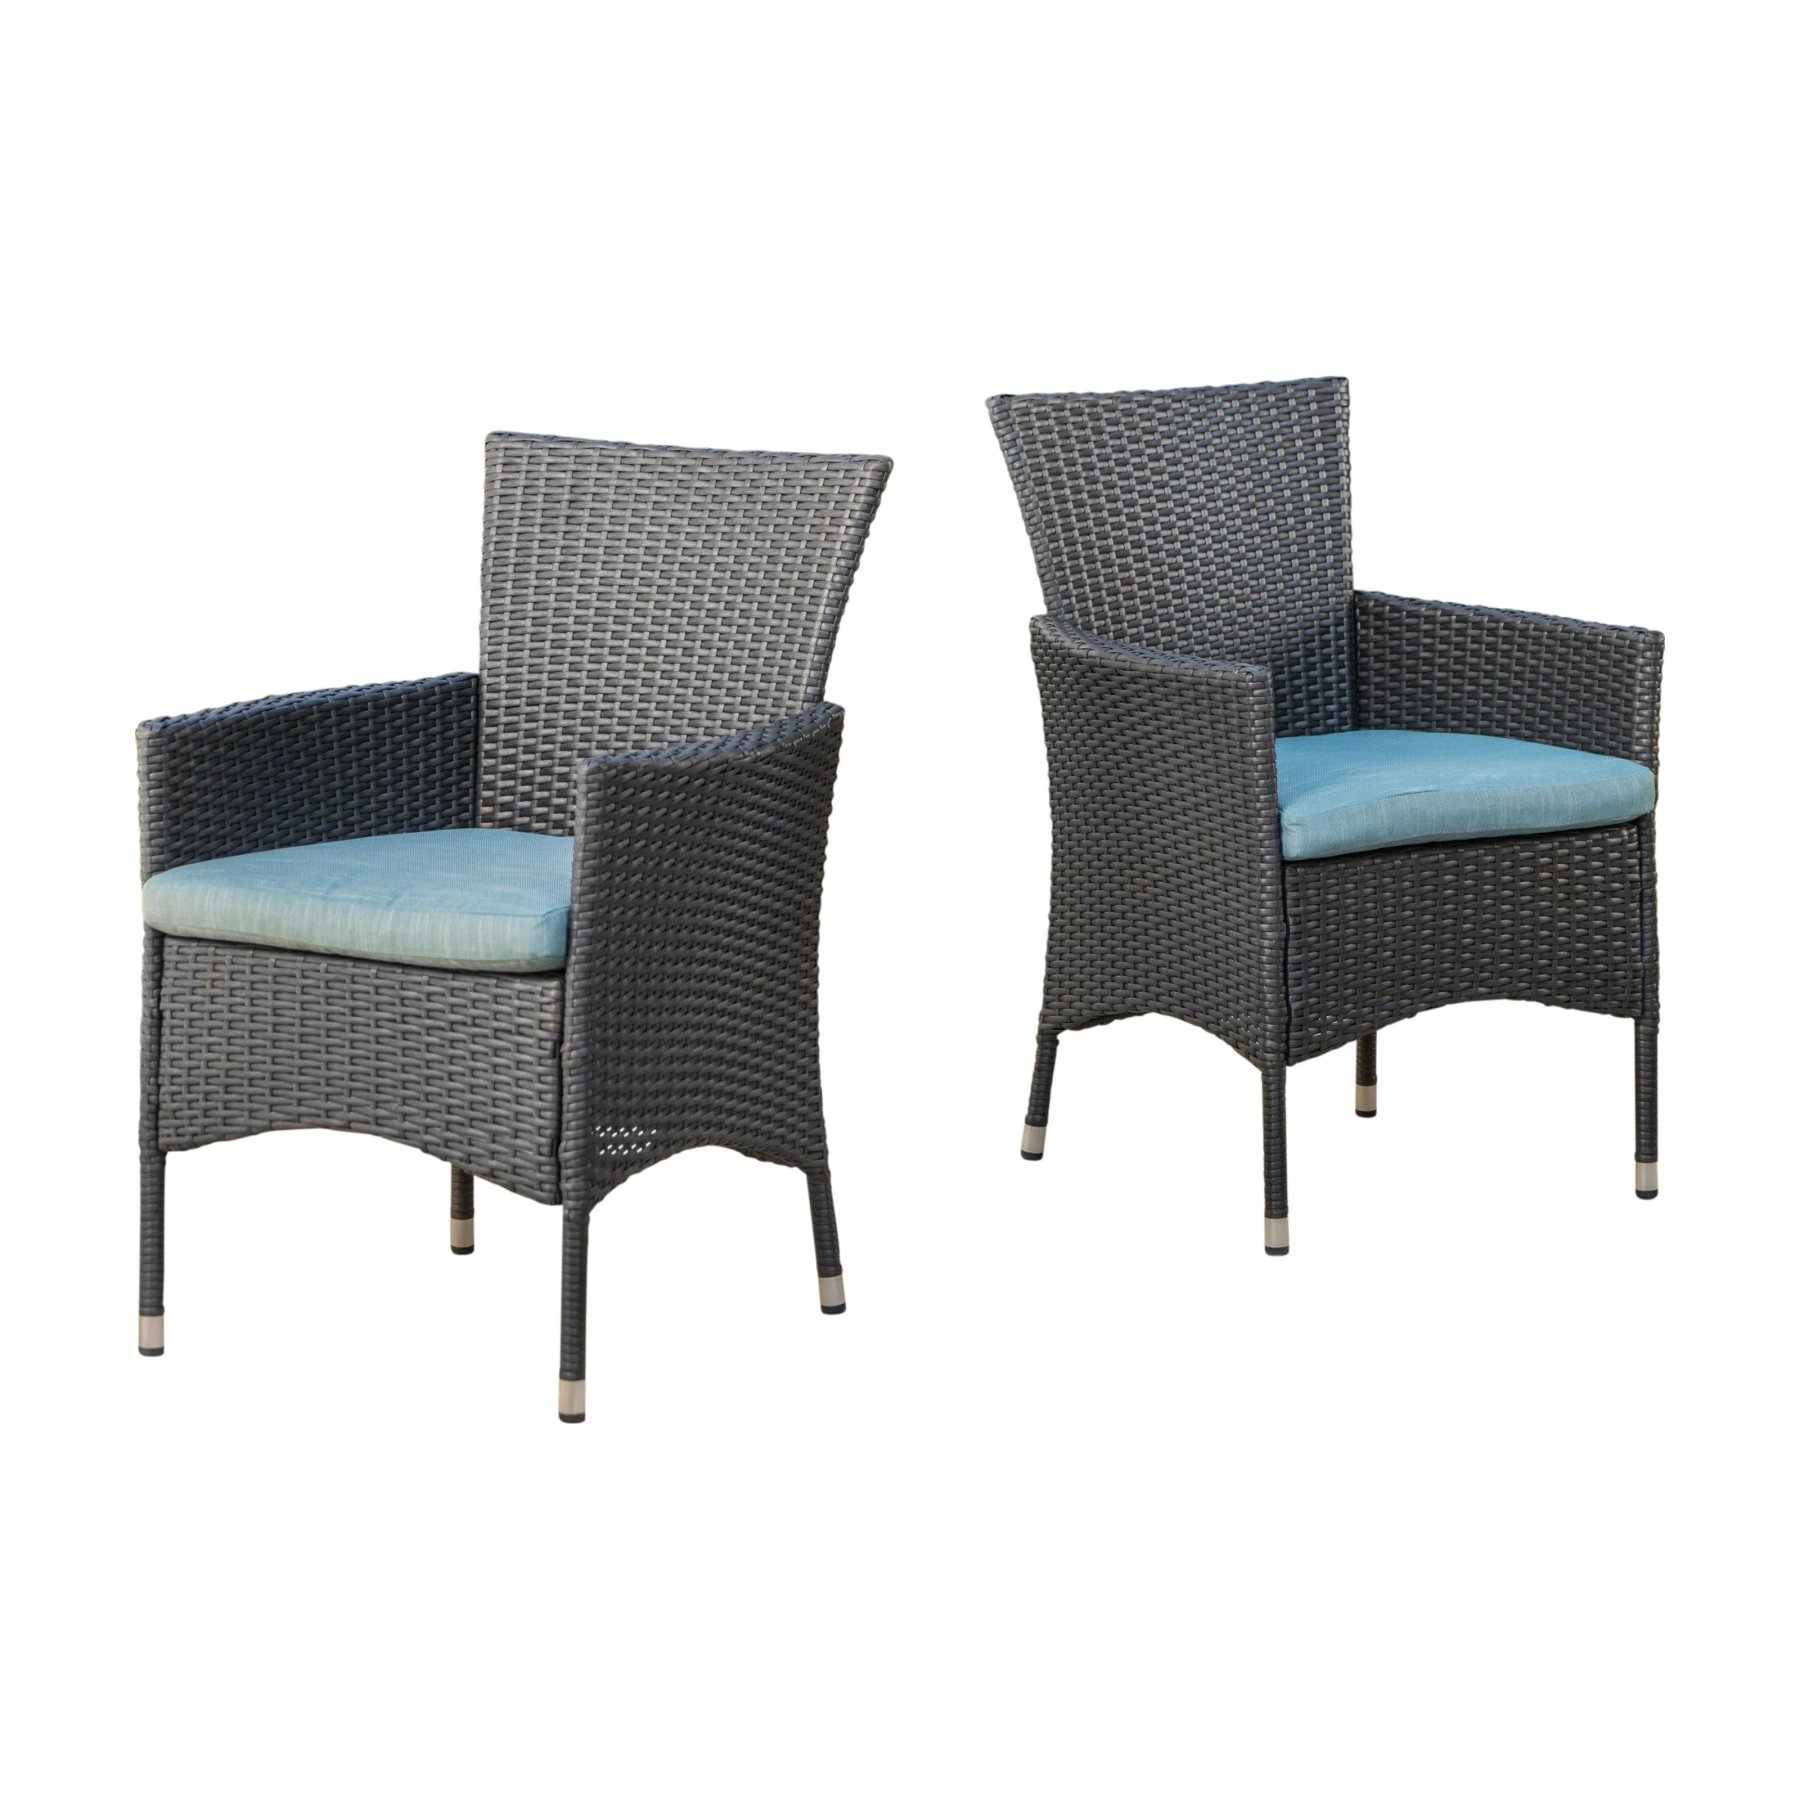 Outdoor Wicker Stacking Chairs Set Of 2 Patio Furniture with regard to sizing 1800 X 1800